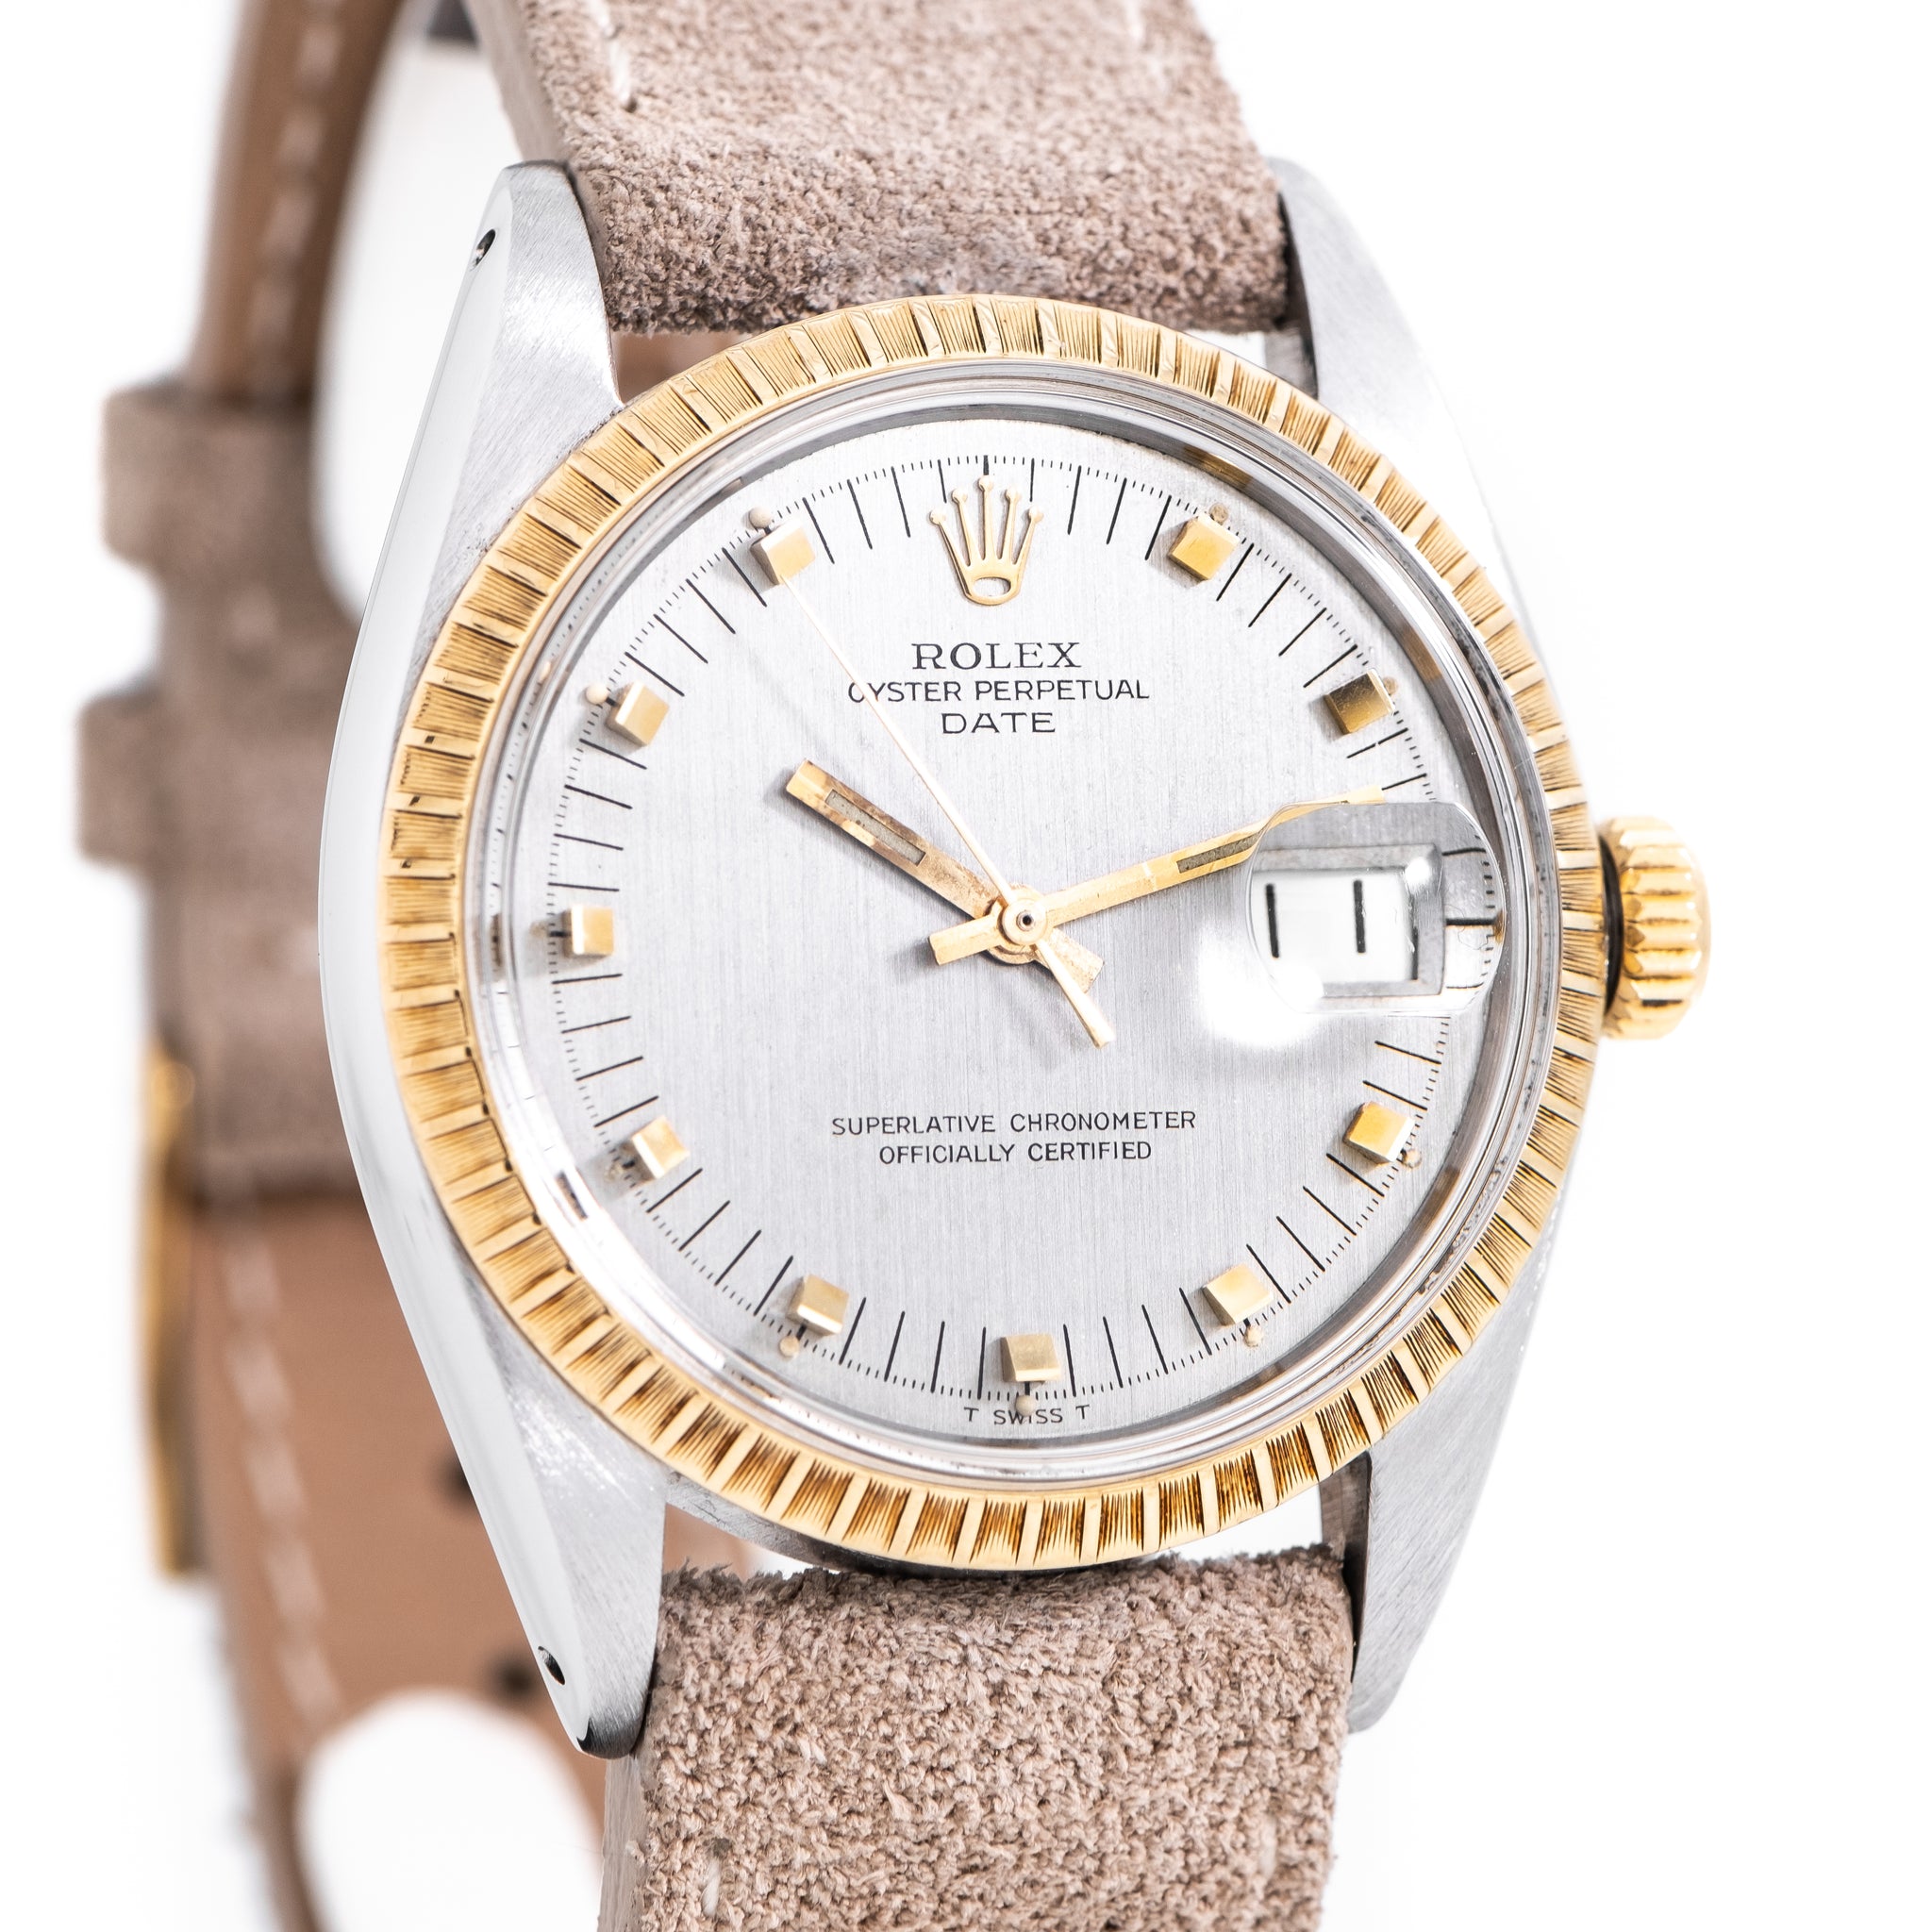 reaktion Ass klar 1966 Vintage Rolex Oyster Perpetual Date Automatic Ref. 1505 in 18K Ye –  Second Time Around Watch Company